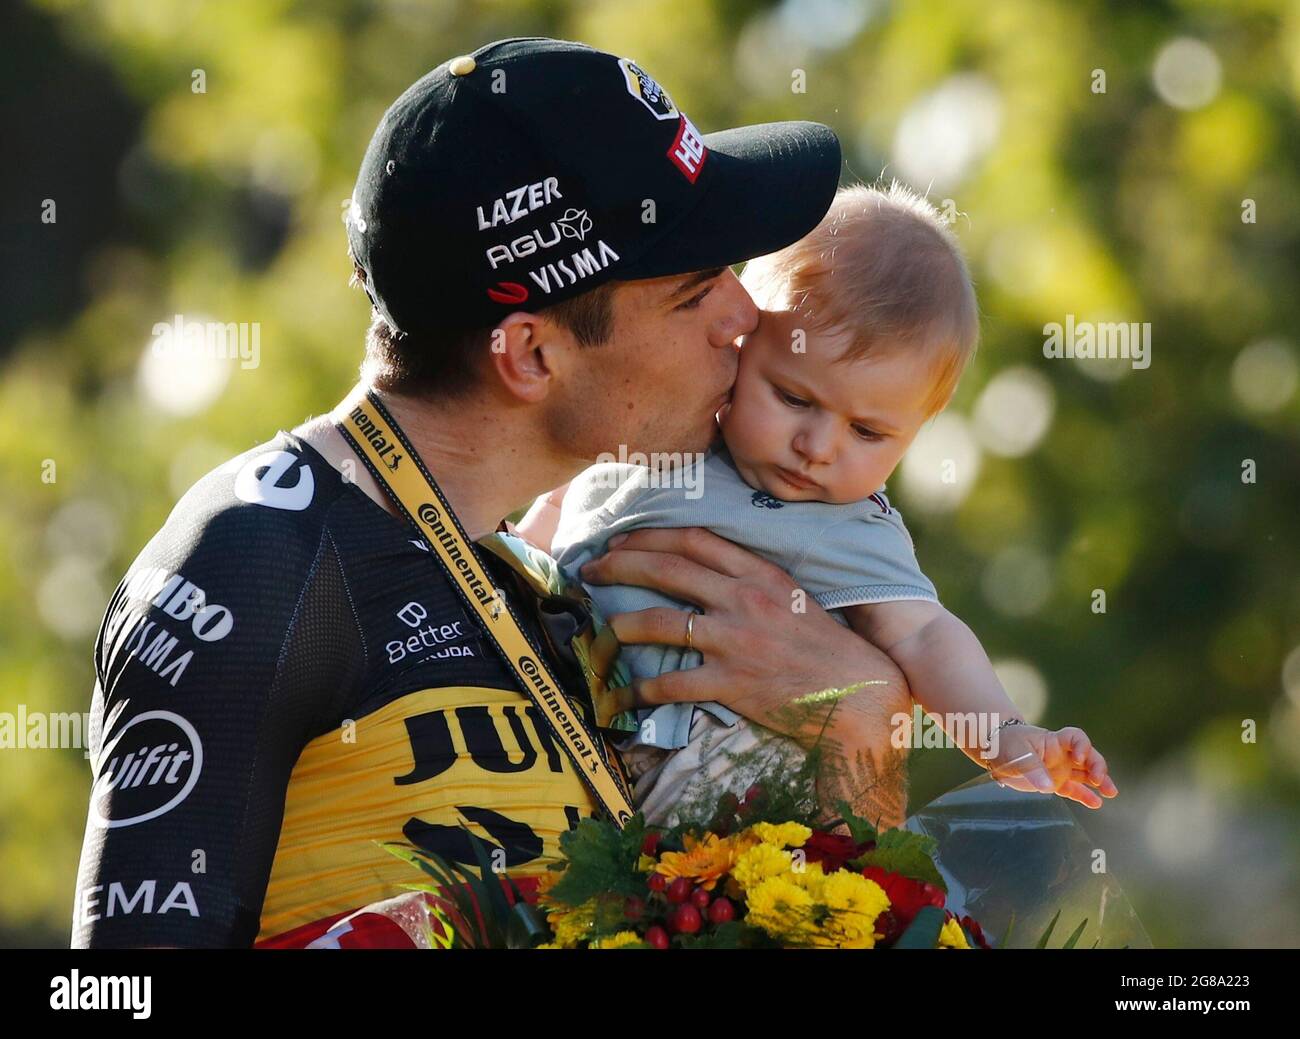 Cycling - Tour de France - Stage 21 - Chatou to Paris Champs-Elysees -  France - July 18, 2021 Team Jumbo–Visma rider Wout van Aert of Belgium  holds a baby as he